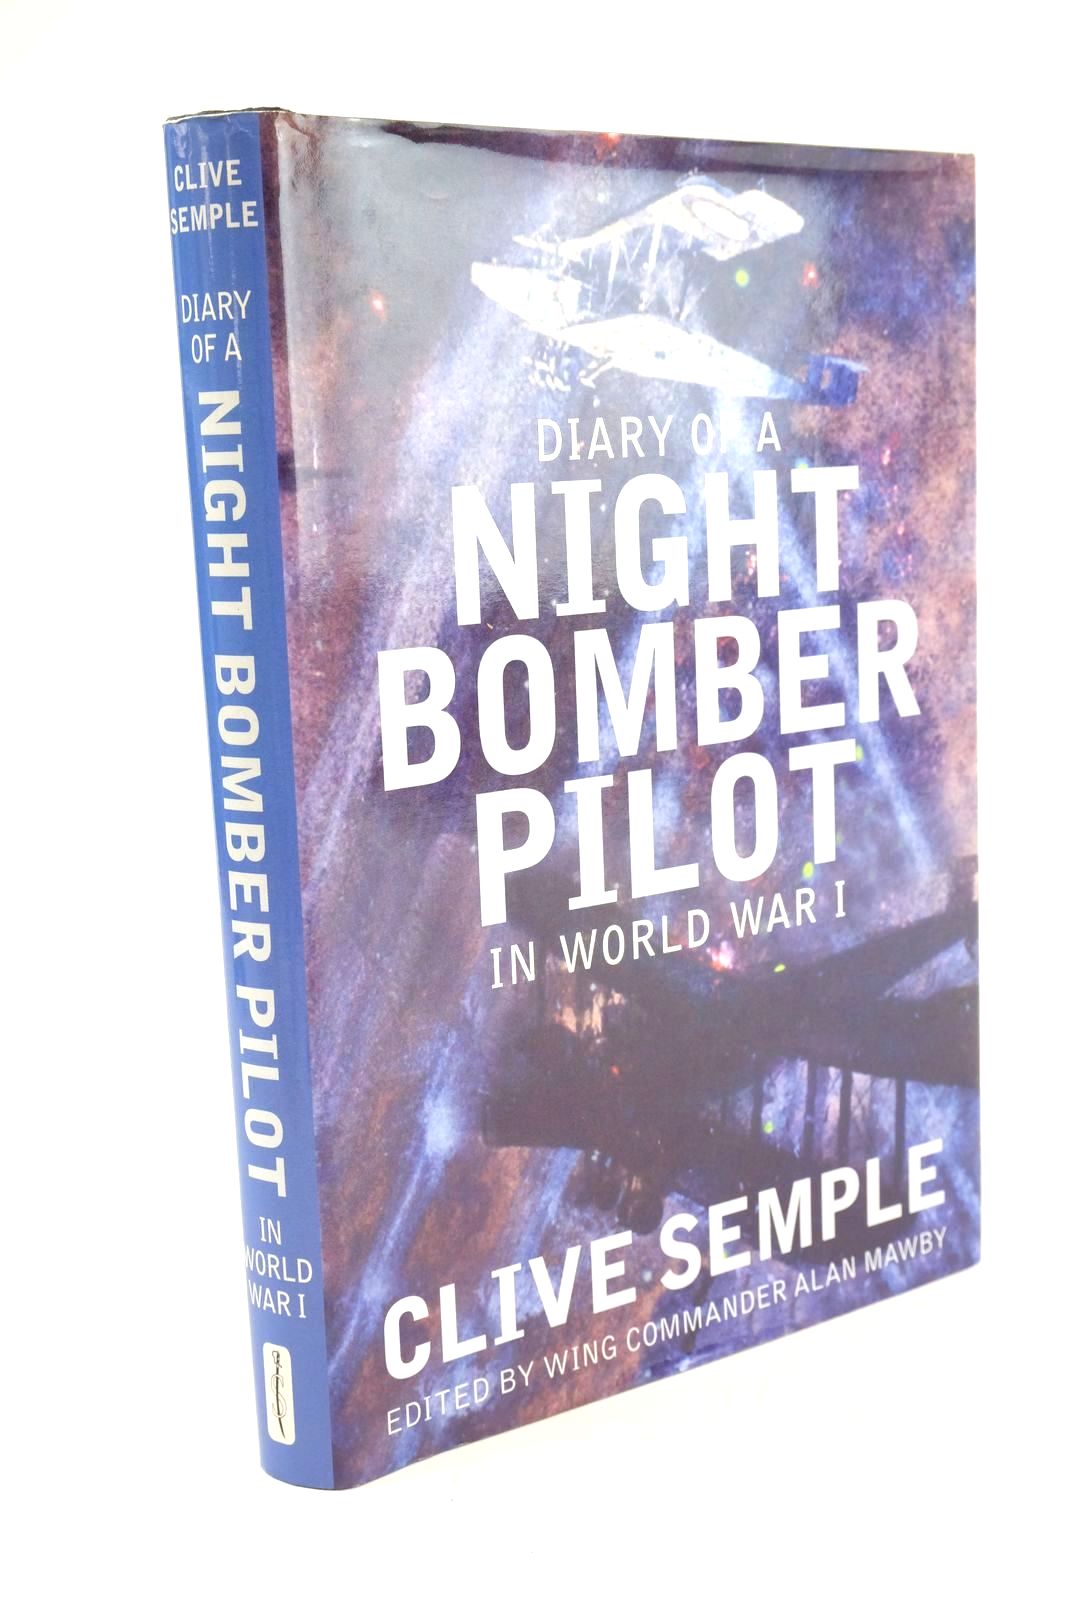 Photo of DIARY OF A NIGHT BOMBER PILOT IN WORLD WAR I written by Semple, Clive Mawby, A.J. published by Spellmount Ltd. (STOCK CODE: 1325193)  for sale by Stella & Rose's Books